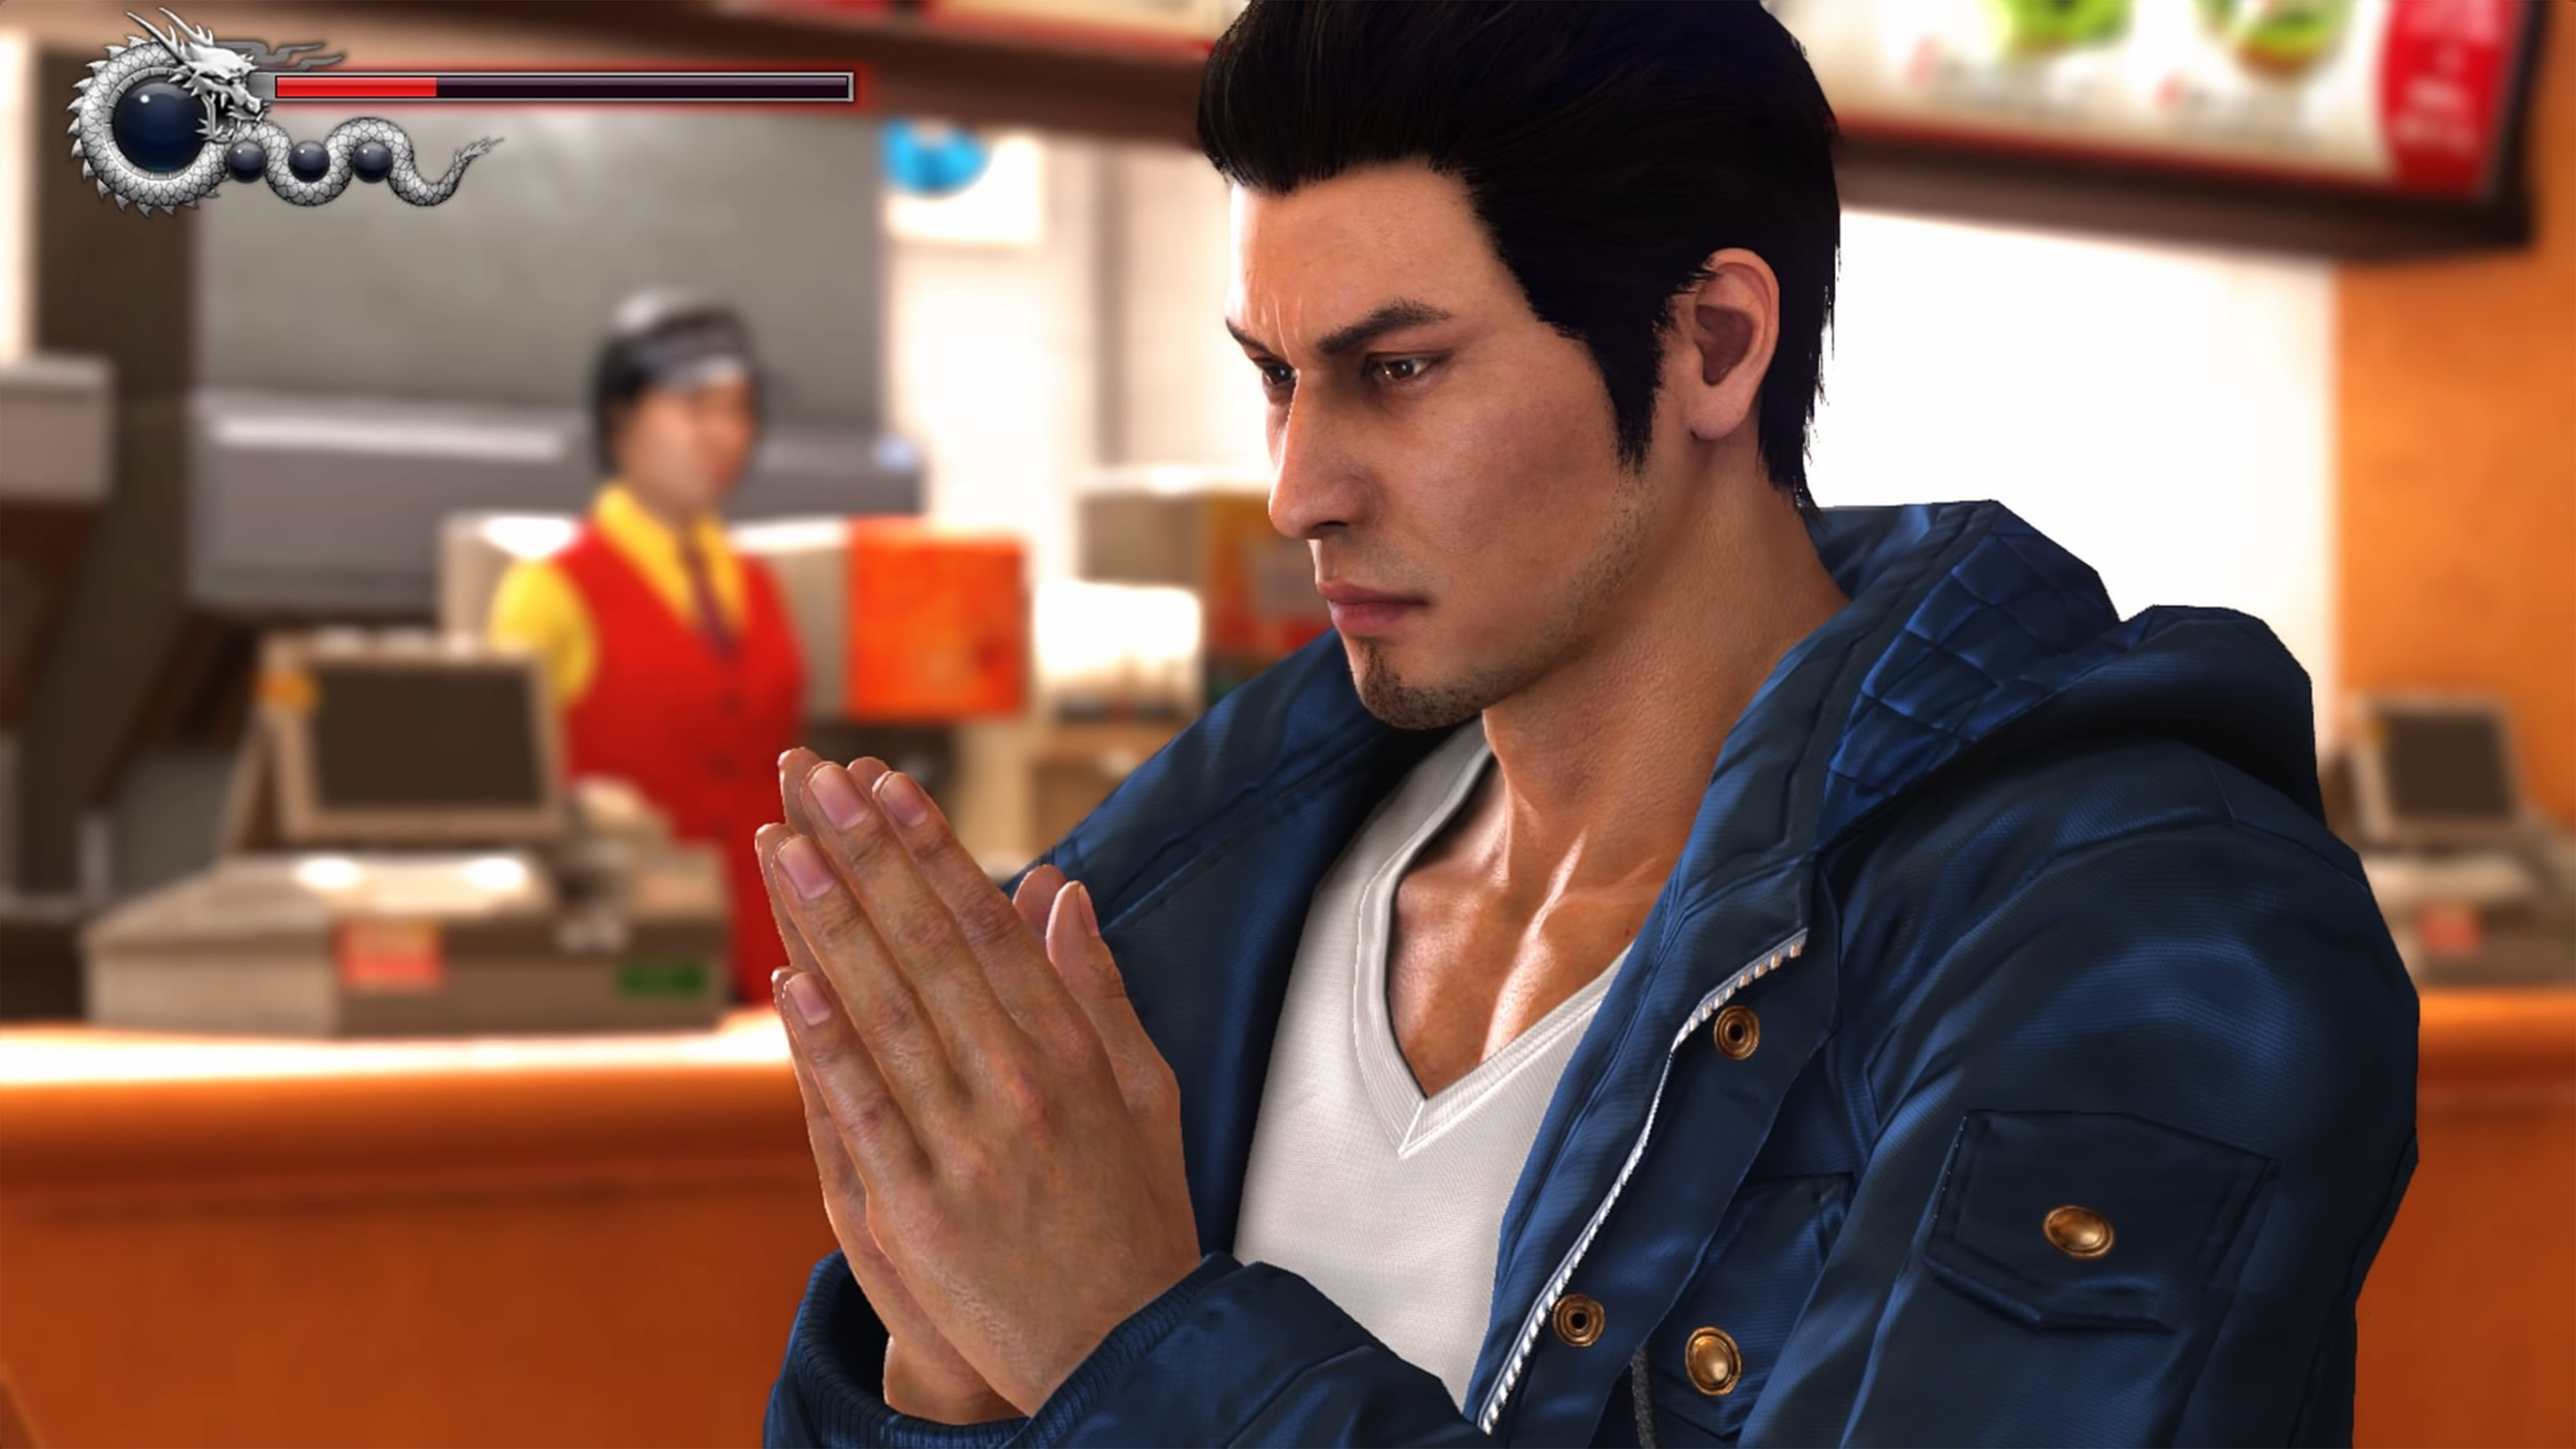 download game yakuza for android